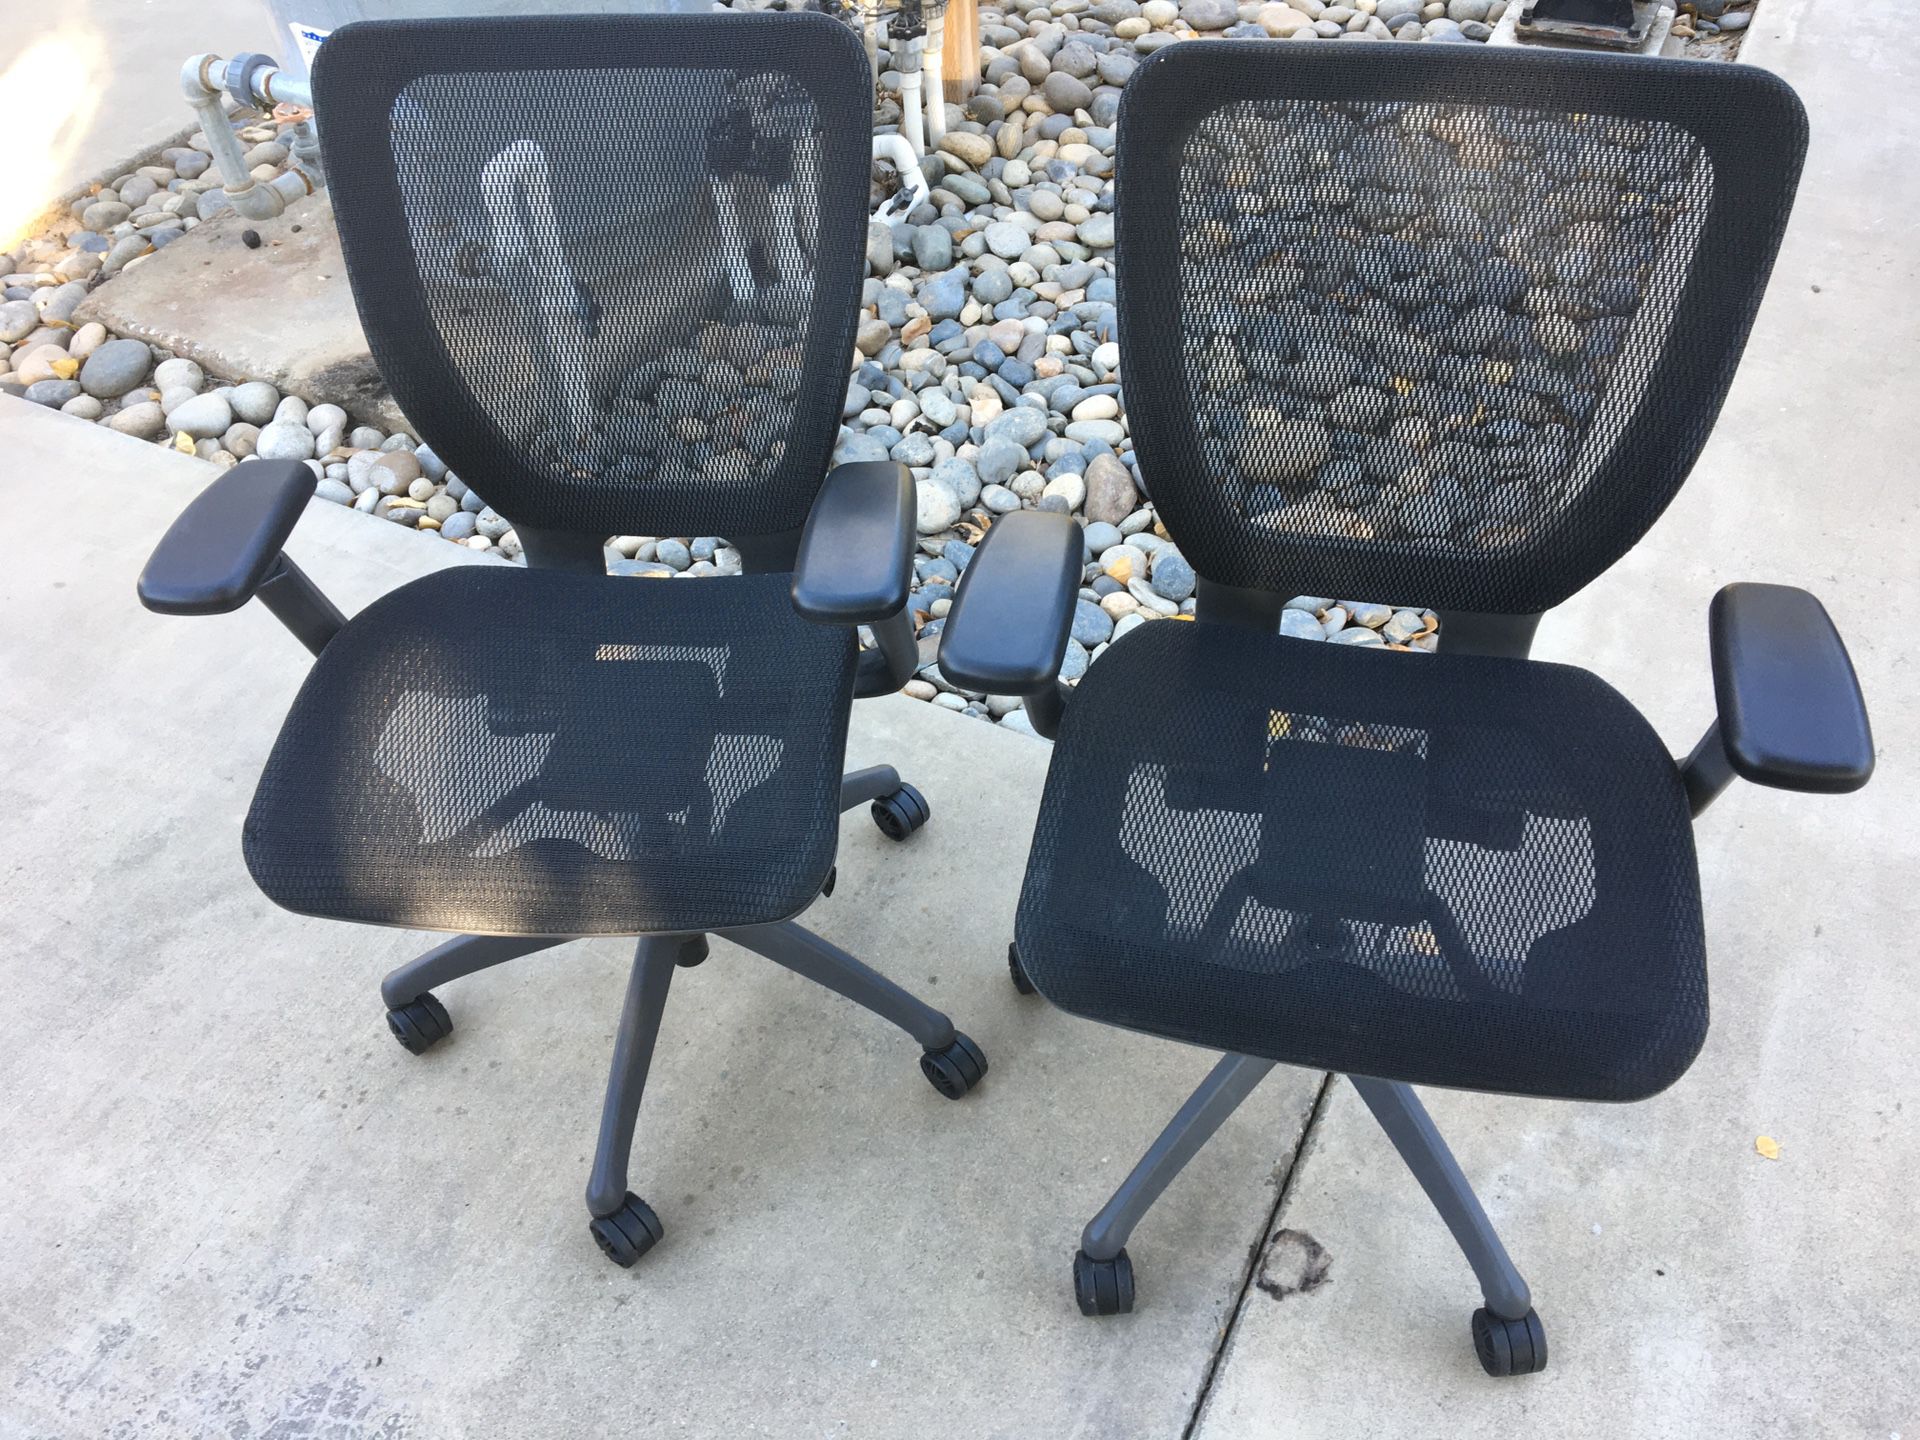 Gently used high end office chairs